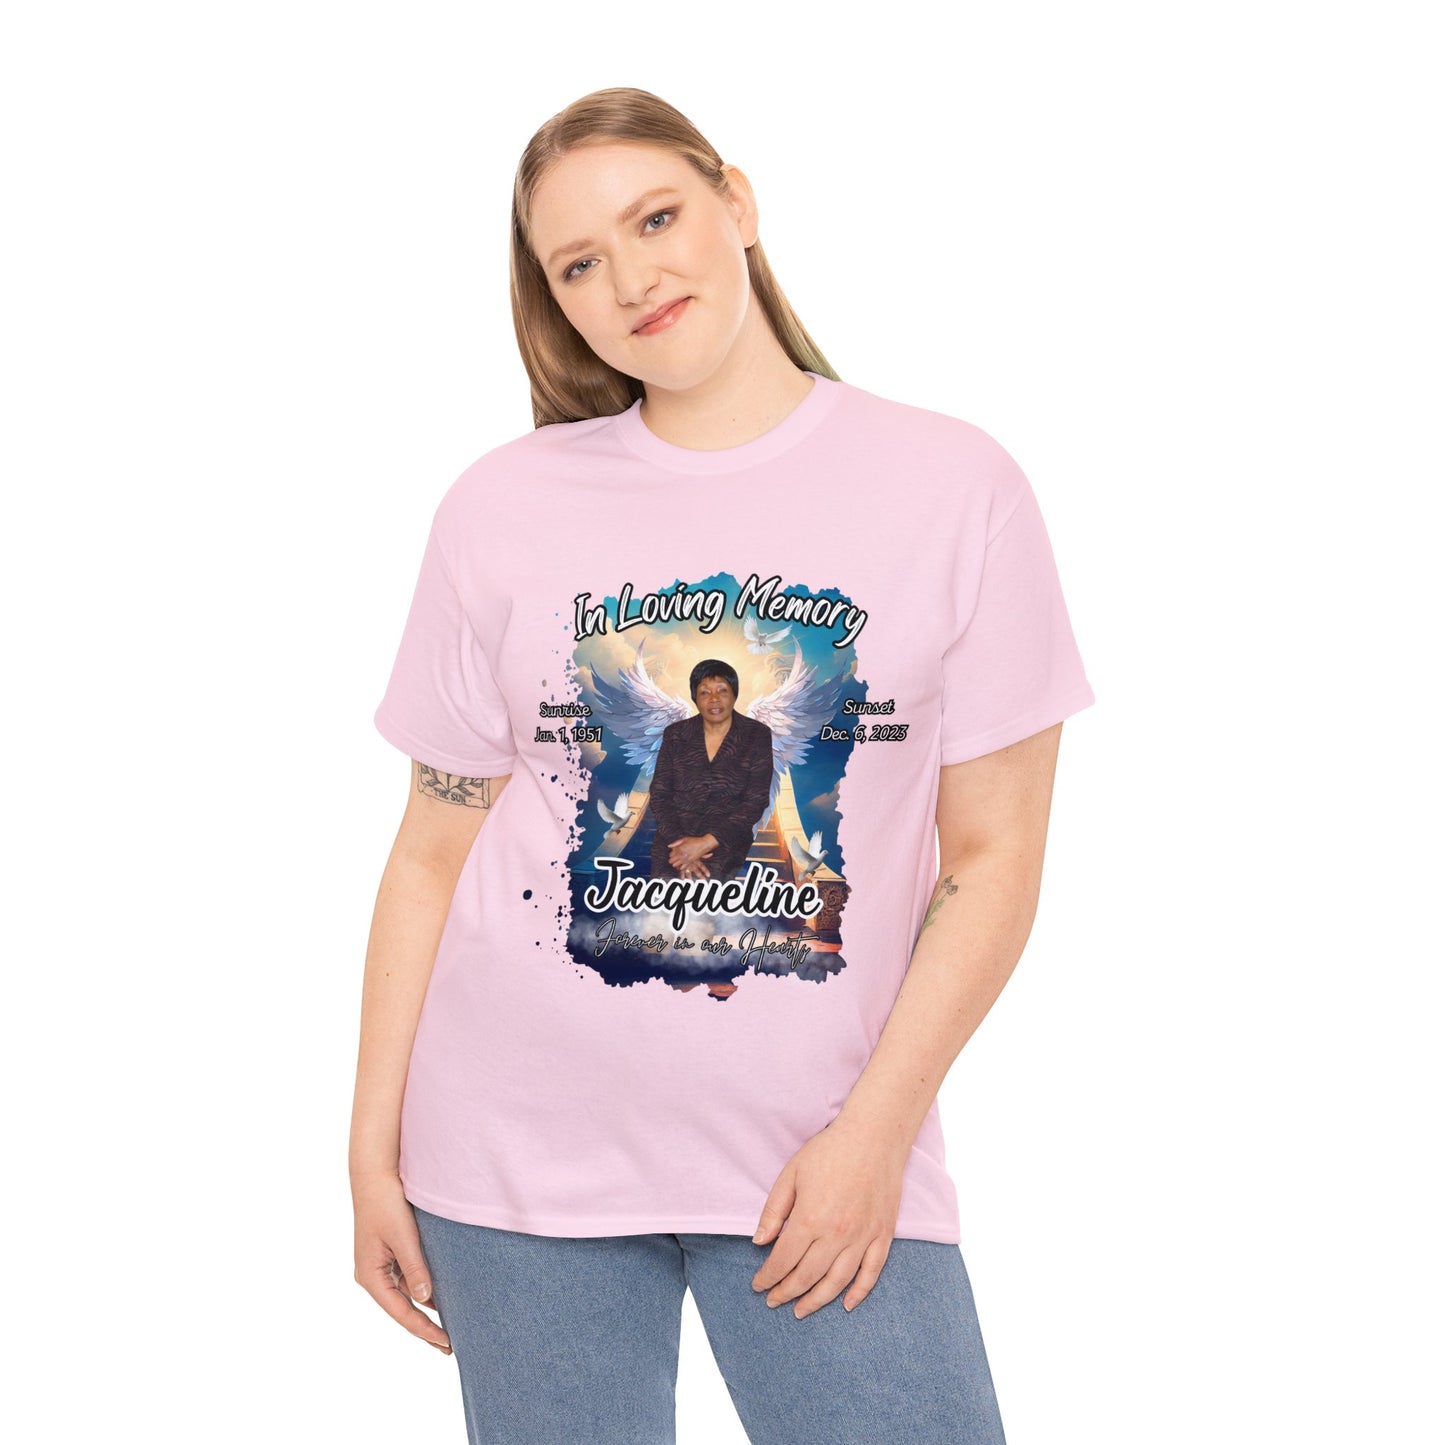 Jacqueline "Forever In Our Hearts" Memorial T-Shirt